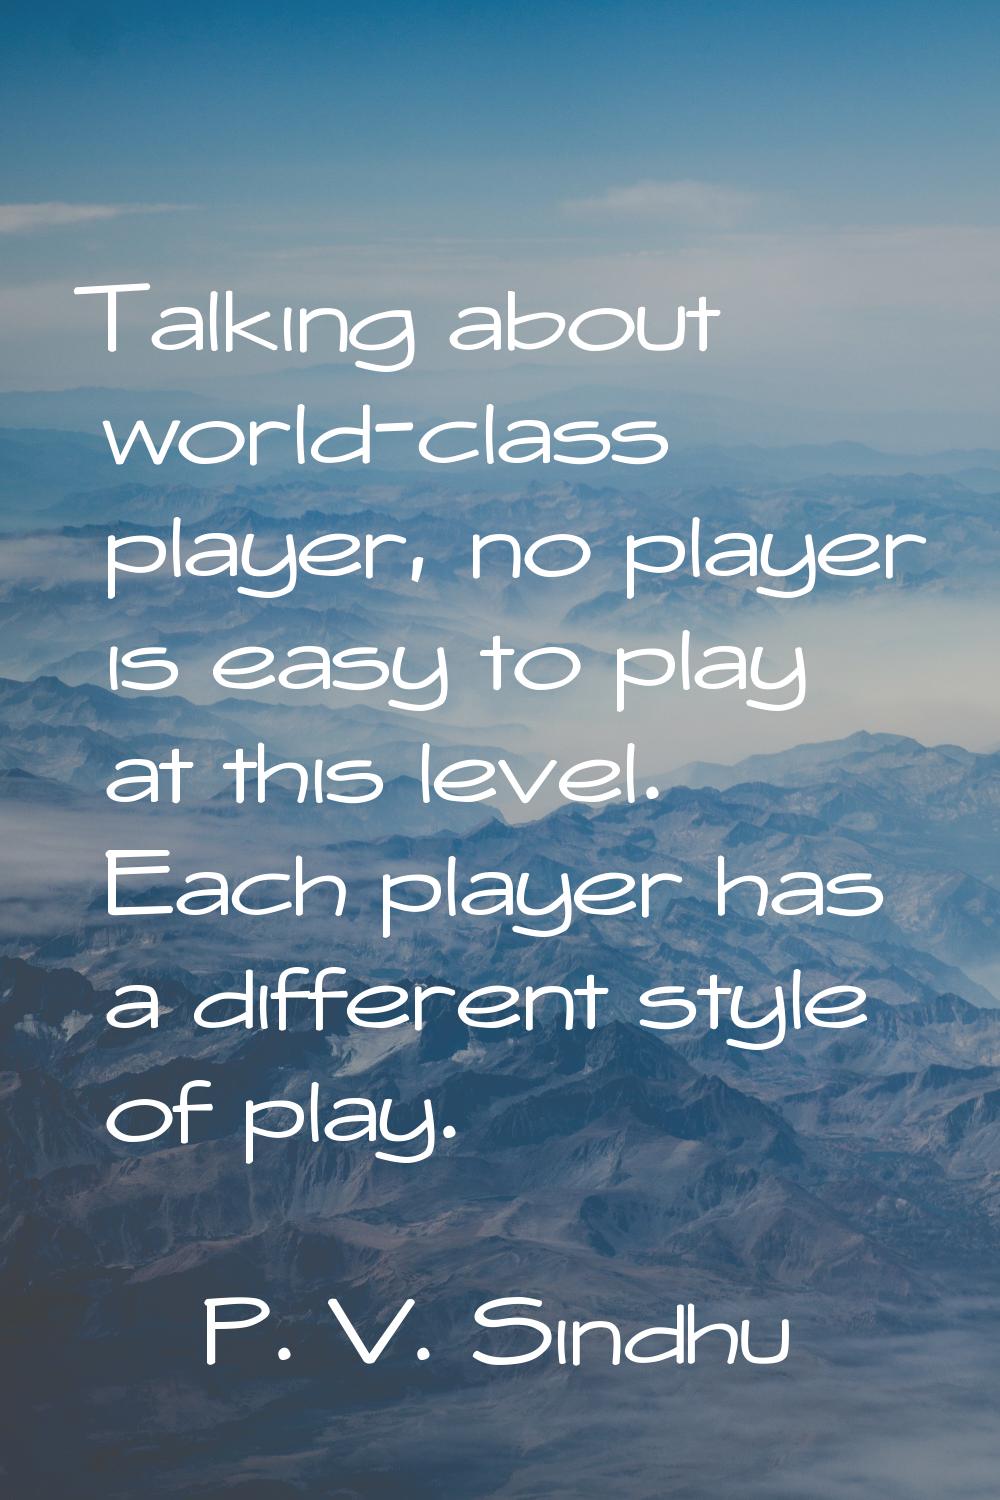 Talking about world-class player, no player is easy to play at this level. Each player has a differ